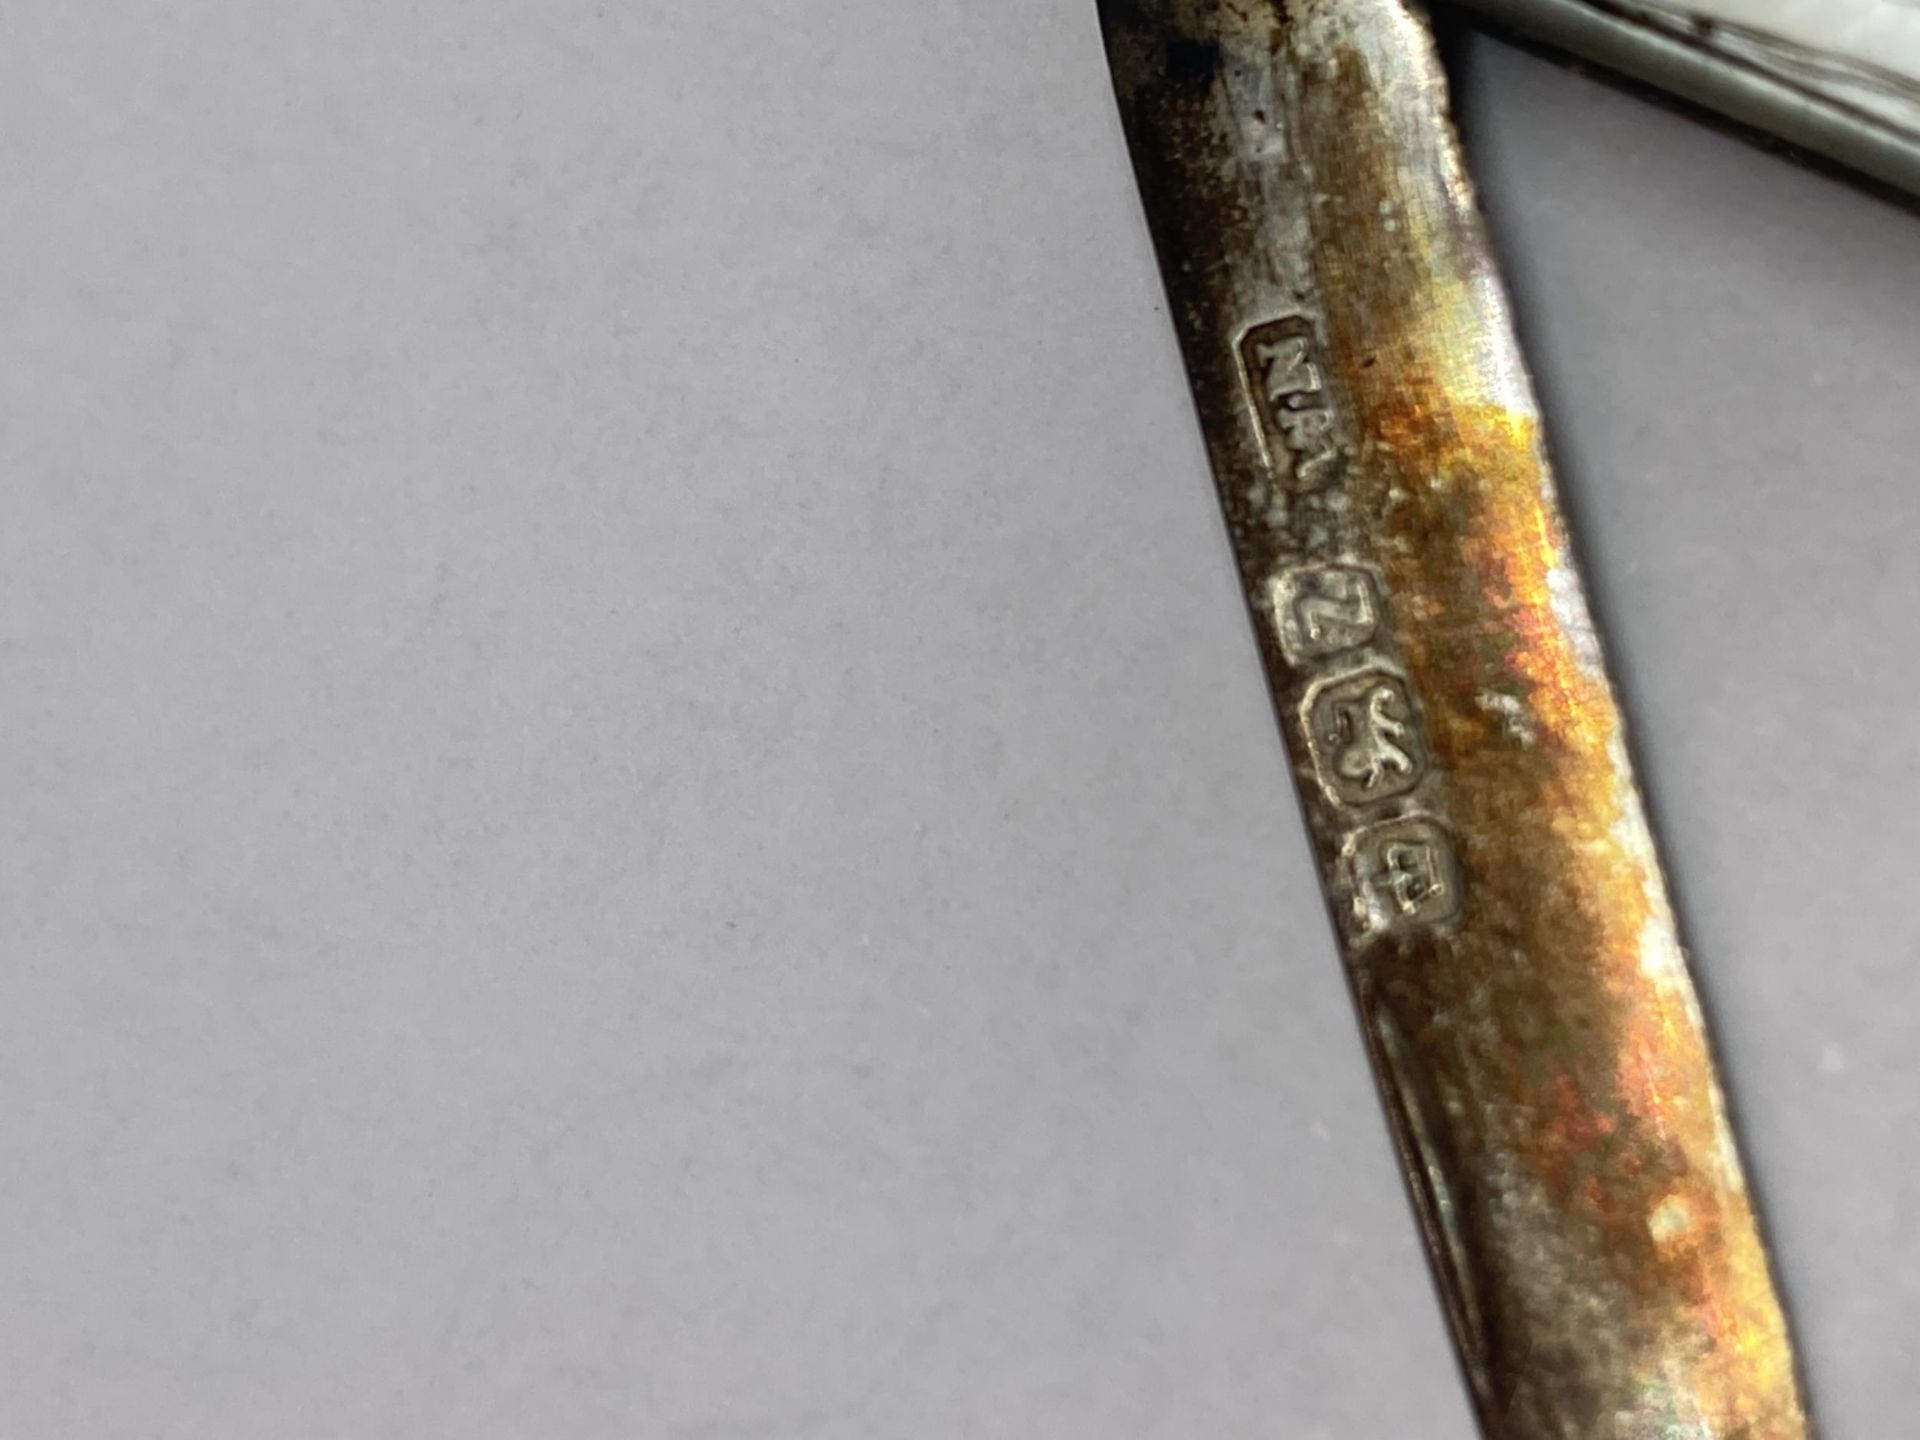 A HALLMARKED SHEFFIELD SILVER FRUIT KNIFE WITH MOTHER OF PEARL HANDLE - Image 2 of 4